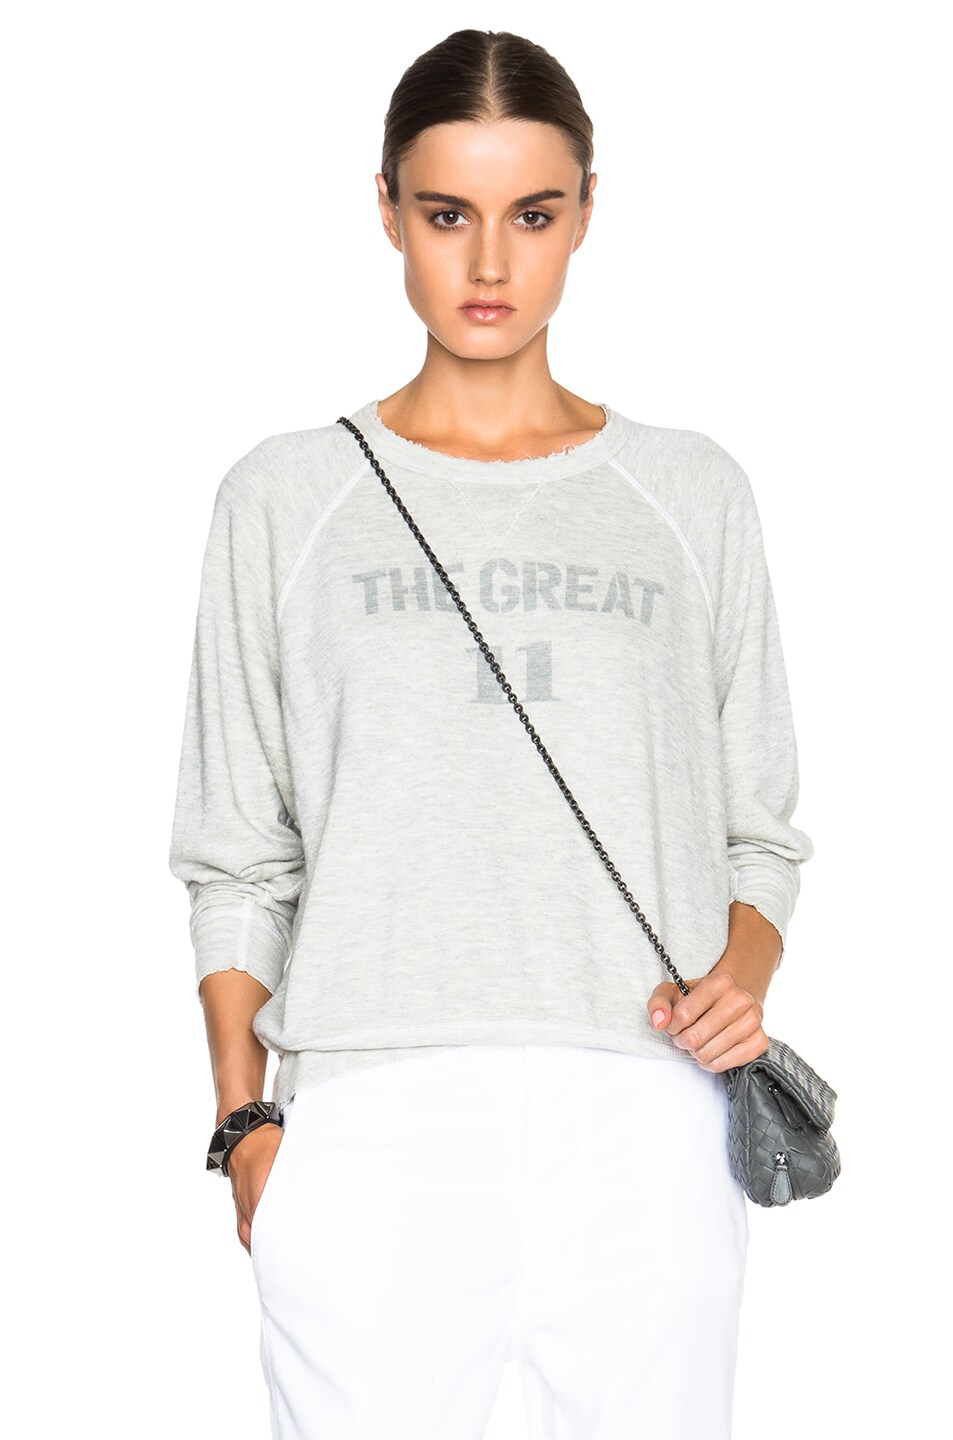 Image 1 of The Great Varsity Sweatshirt in Washed Heather Grey